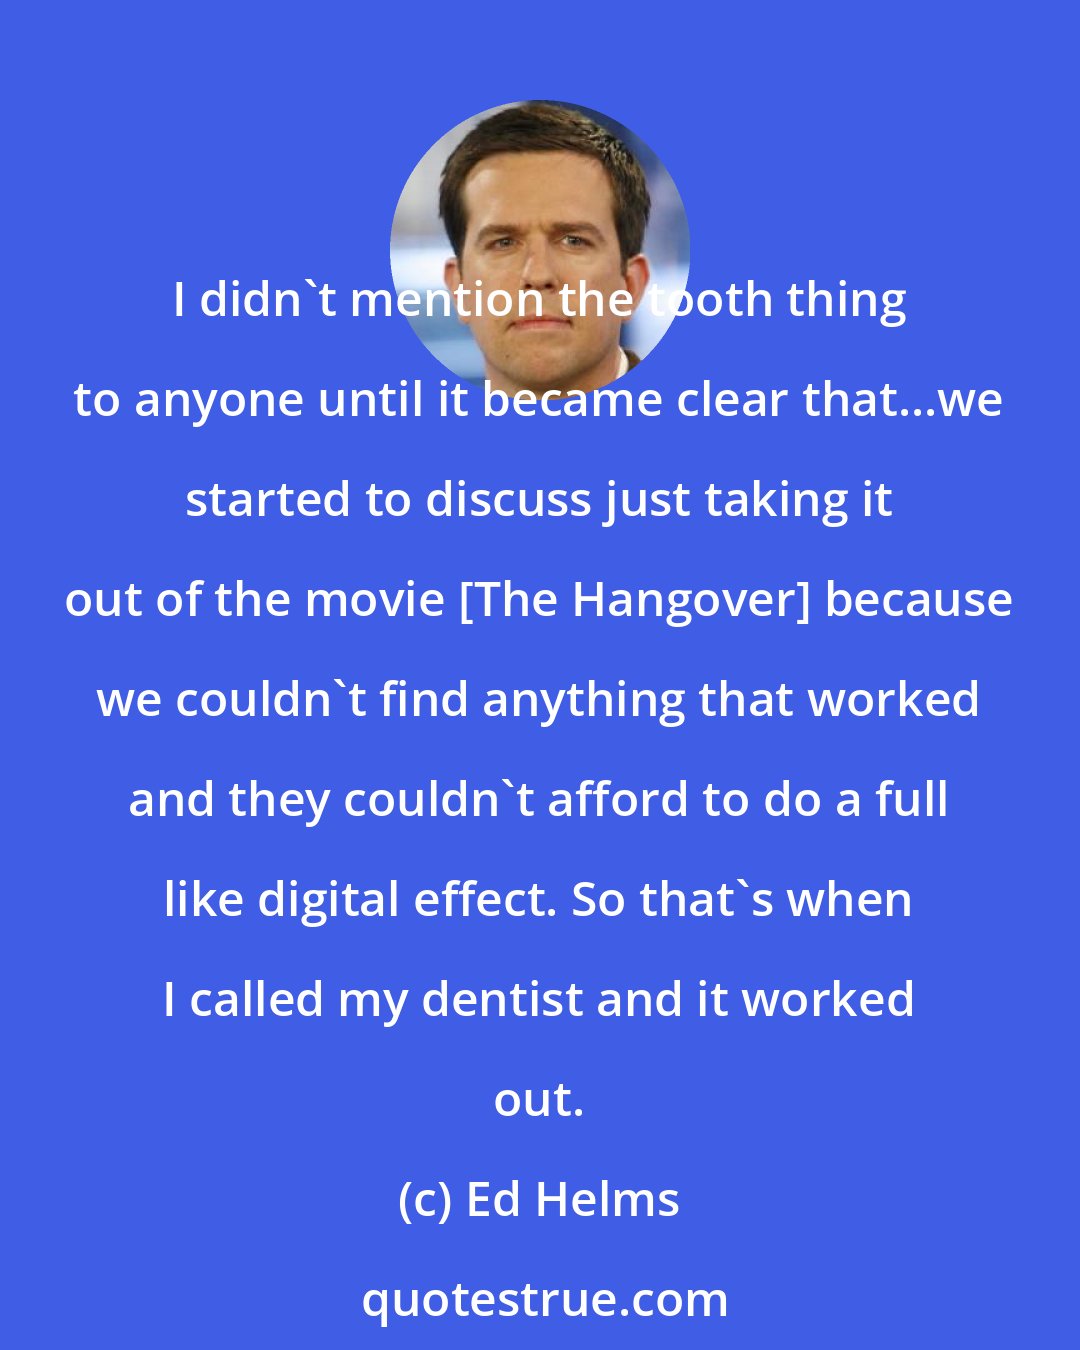 Ed Helms: I didn't mention the tooth thing to anyone until it became clear that...we started to discuss just taking it out of the movie [The Hangover] because we couldn't find anything that worked and they couldn't afford to do a full like digital effect. So that's when I called my dentist and it worked out.